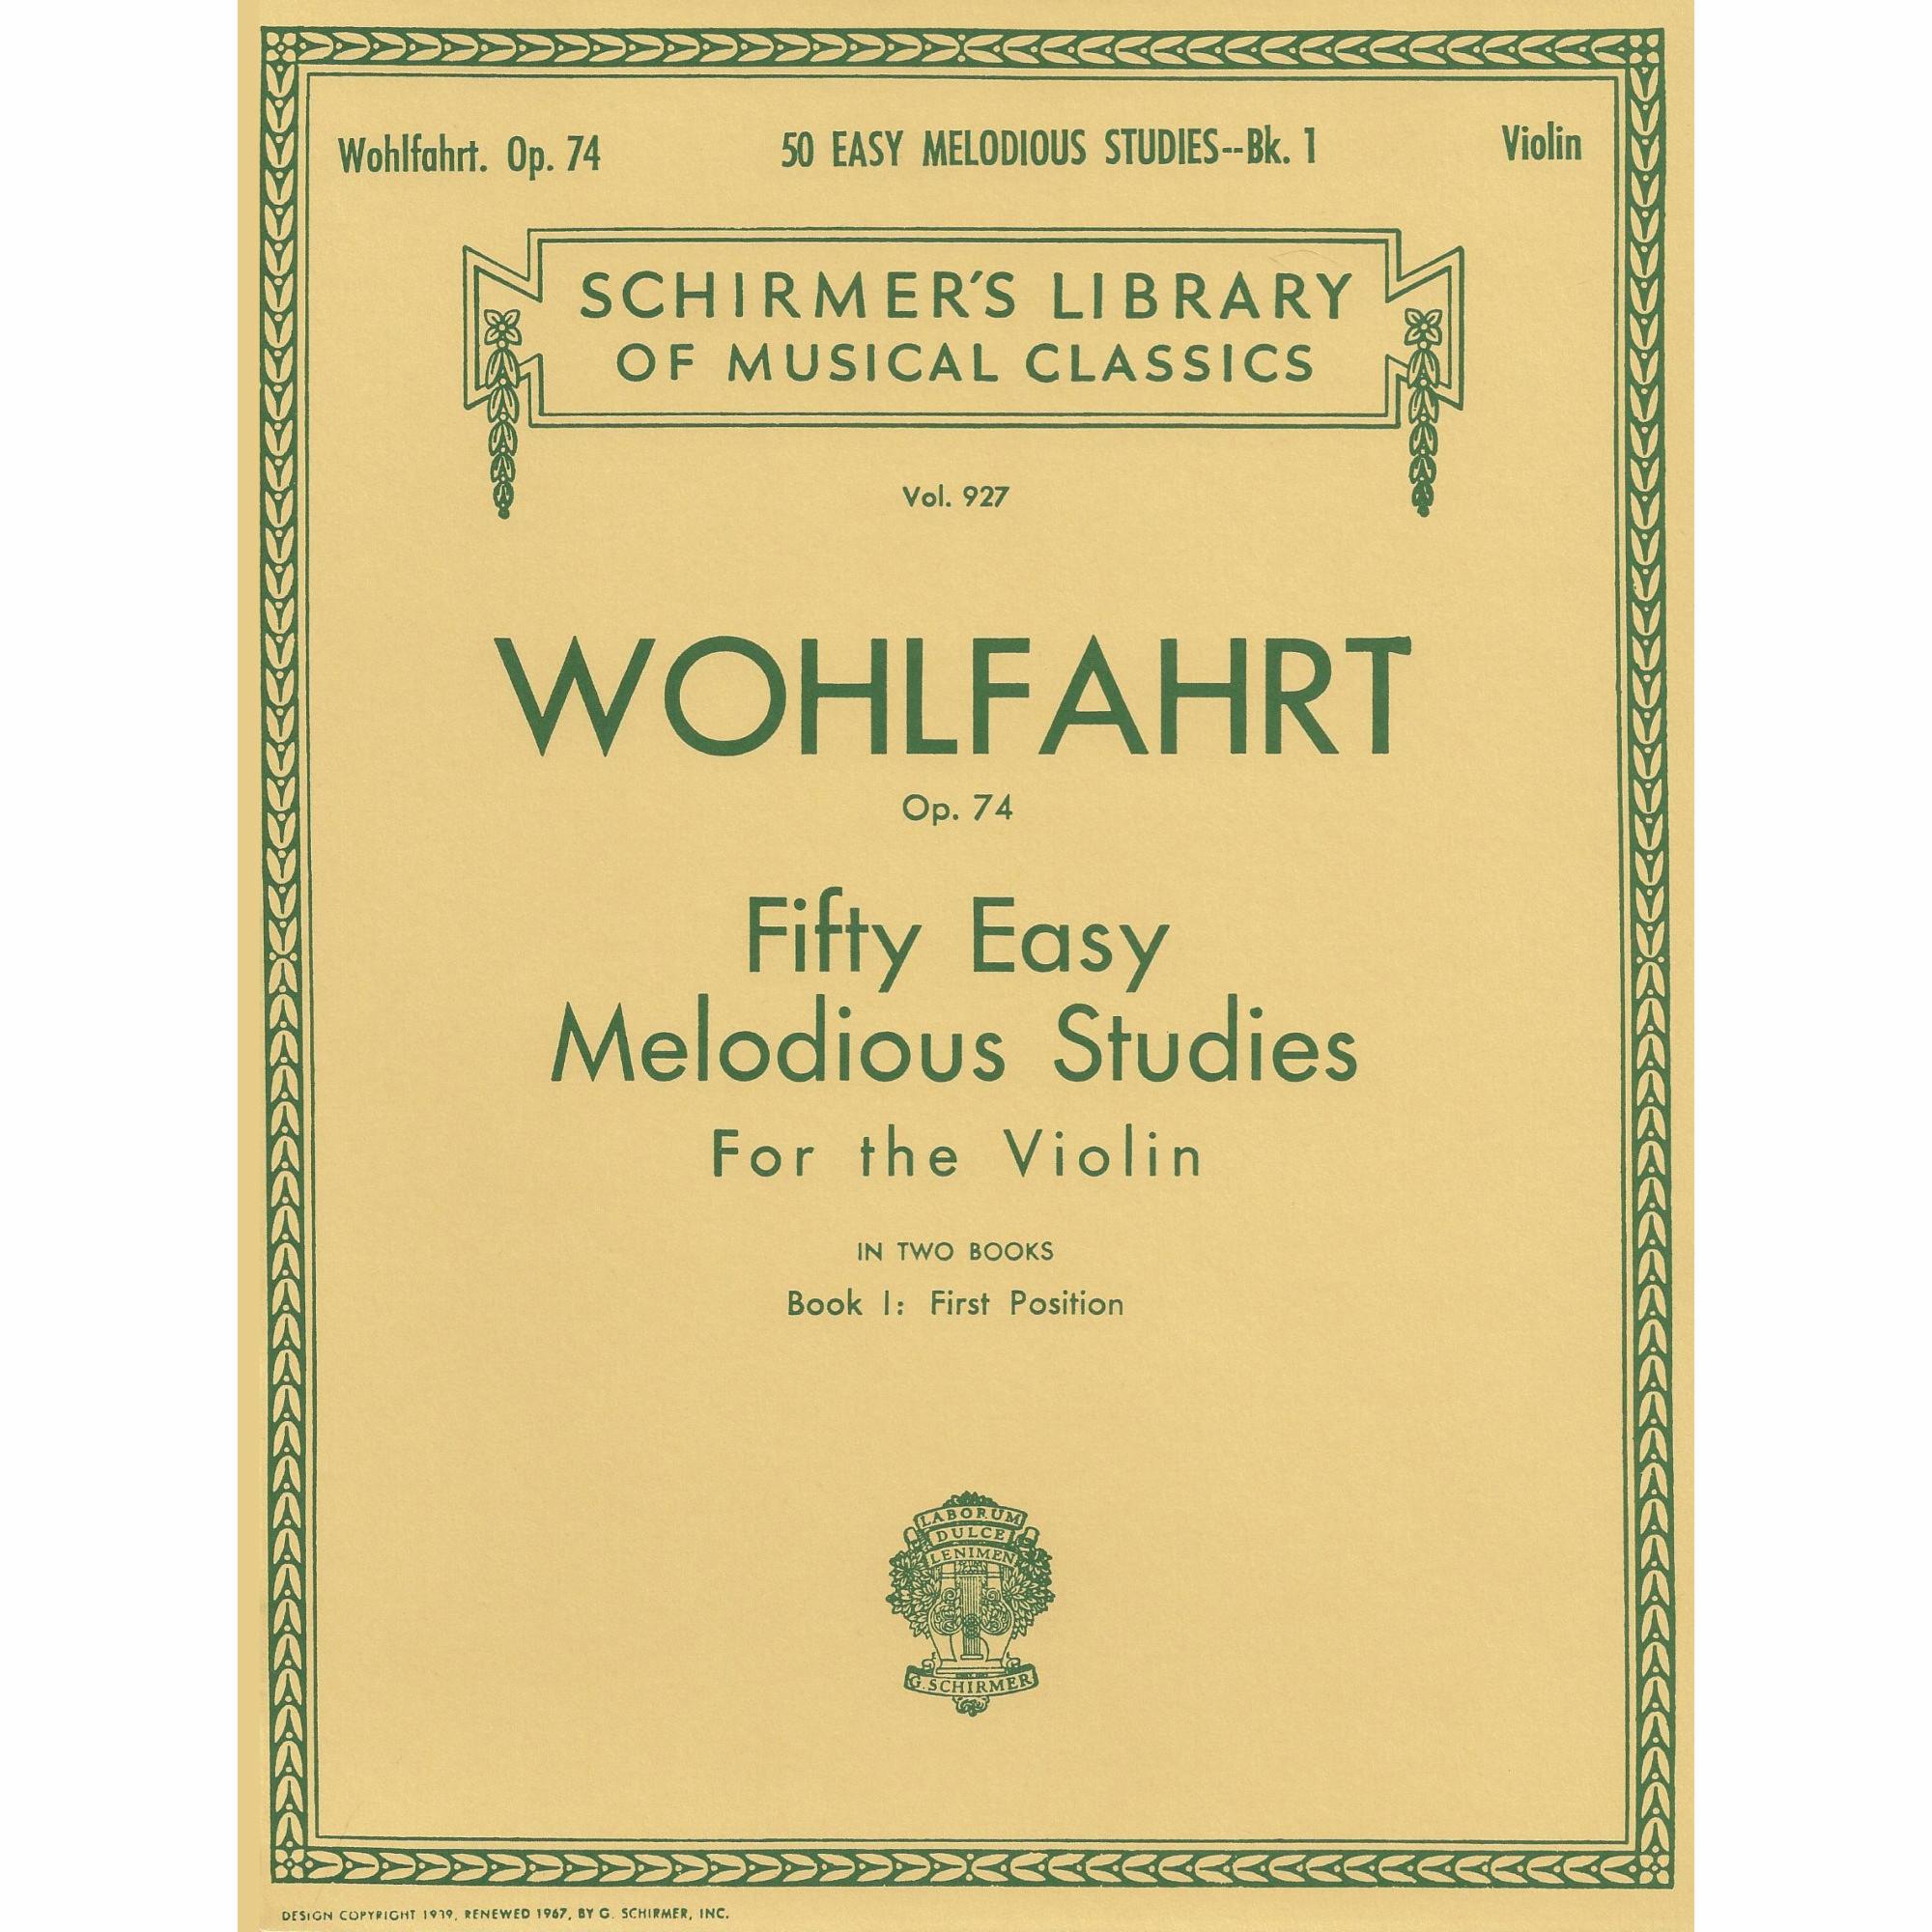 Wohlfahrt -- Fifty Easy Melodious Studies, Op. 74, Books 1-2 for Violin